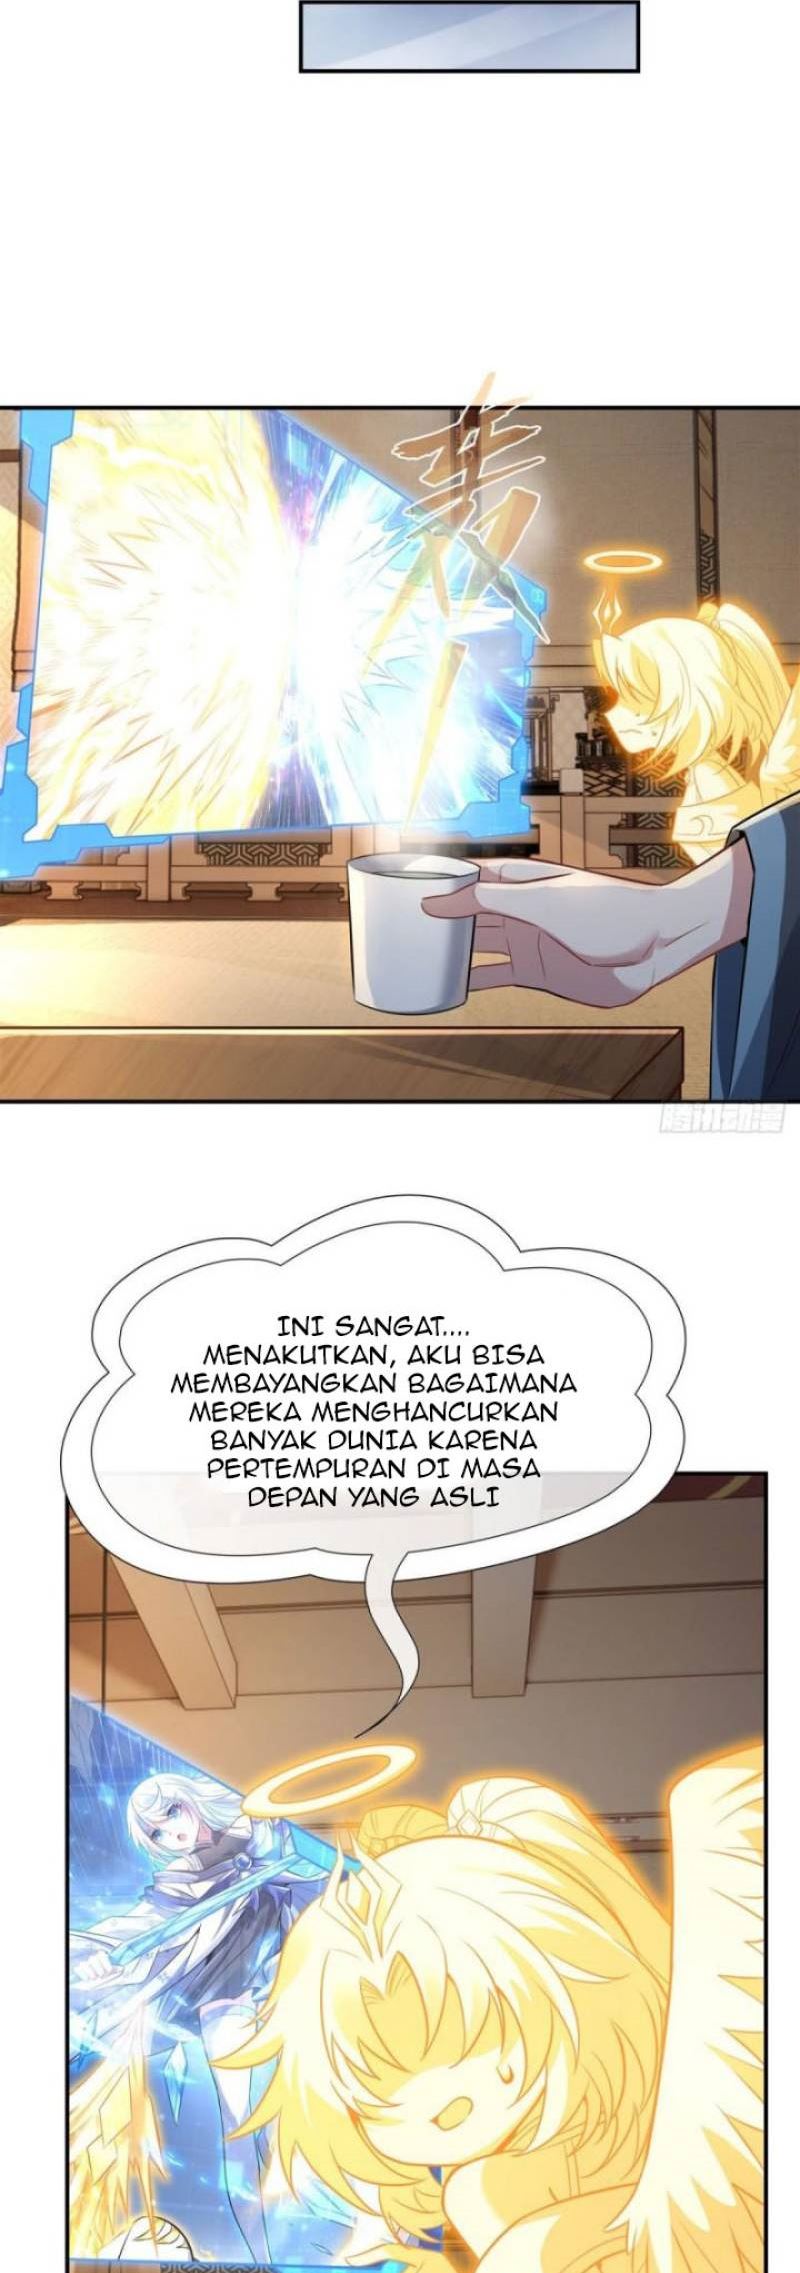 Dilarang COPAS - situs resmi www.mangacanblog.com - Komik my female apprentices are all big shots from the future 082 - chapter 82 83 Indonesia my female apprentices are all big shots from the future 082 - chapter 82 Terbaru 17|Baca Manga Komik Indonesia|Mangacan